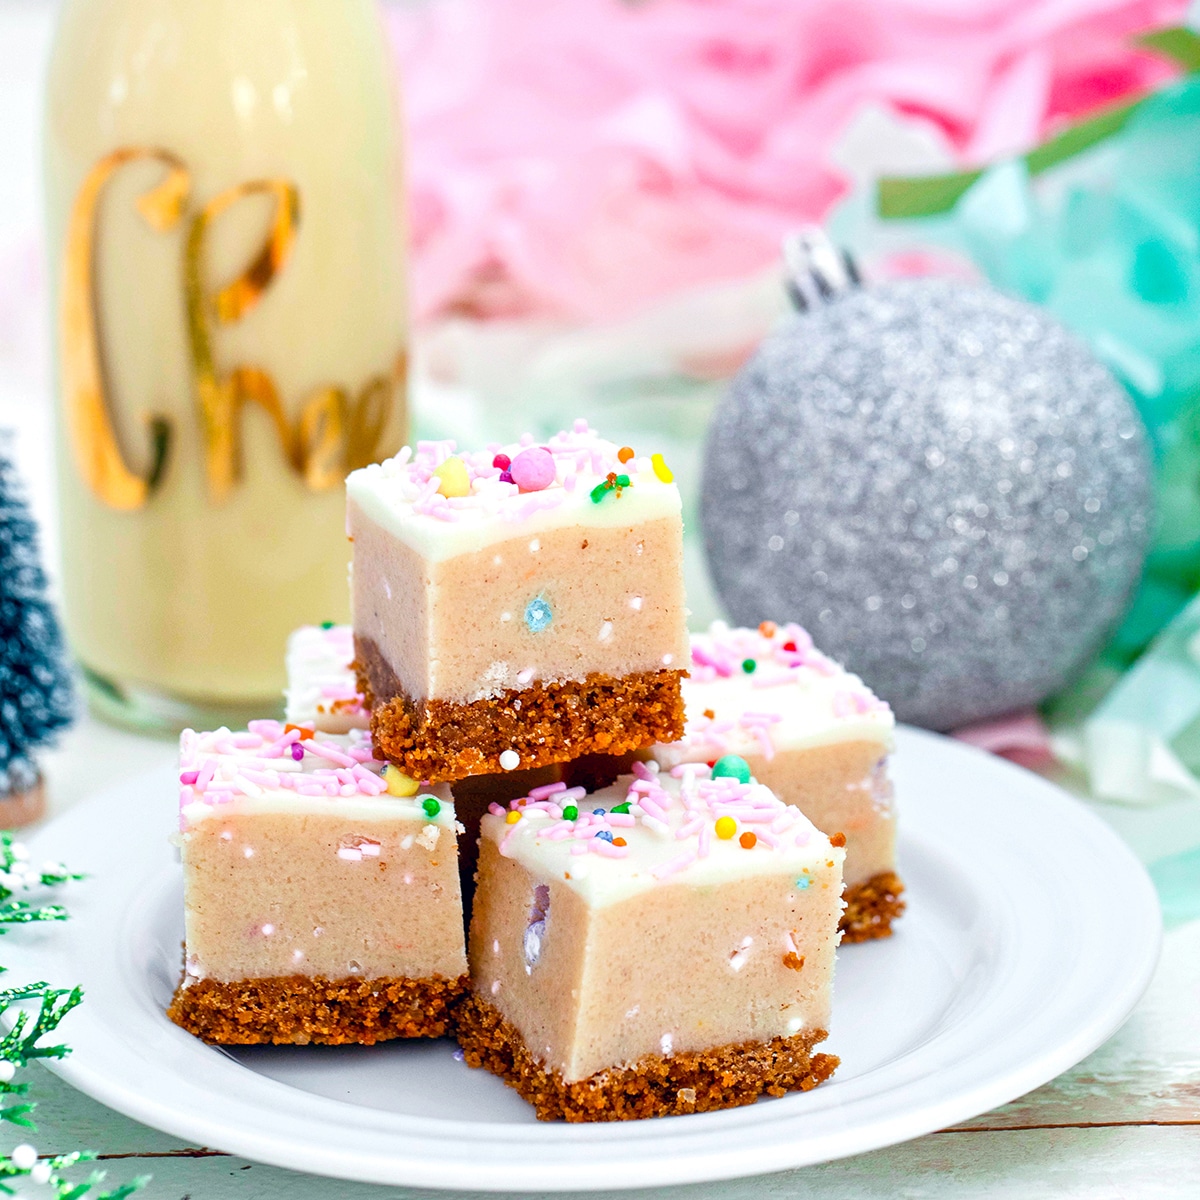 Eggnog Cookie Dough Bars -- Eggnog Cookie Dough Bars are easy no-bake desserts perfect for serving as a holiday dessert or for including on your Christmas cookie platters! | wearenotmartha.com #cookiedough #cookiedoughbars #eggnogdesserts #christmascookies #holidaydesserts